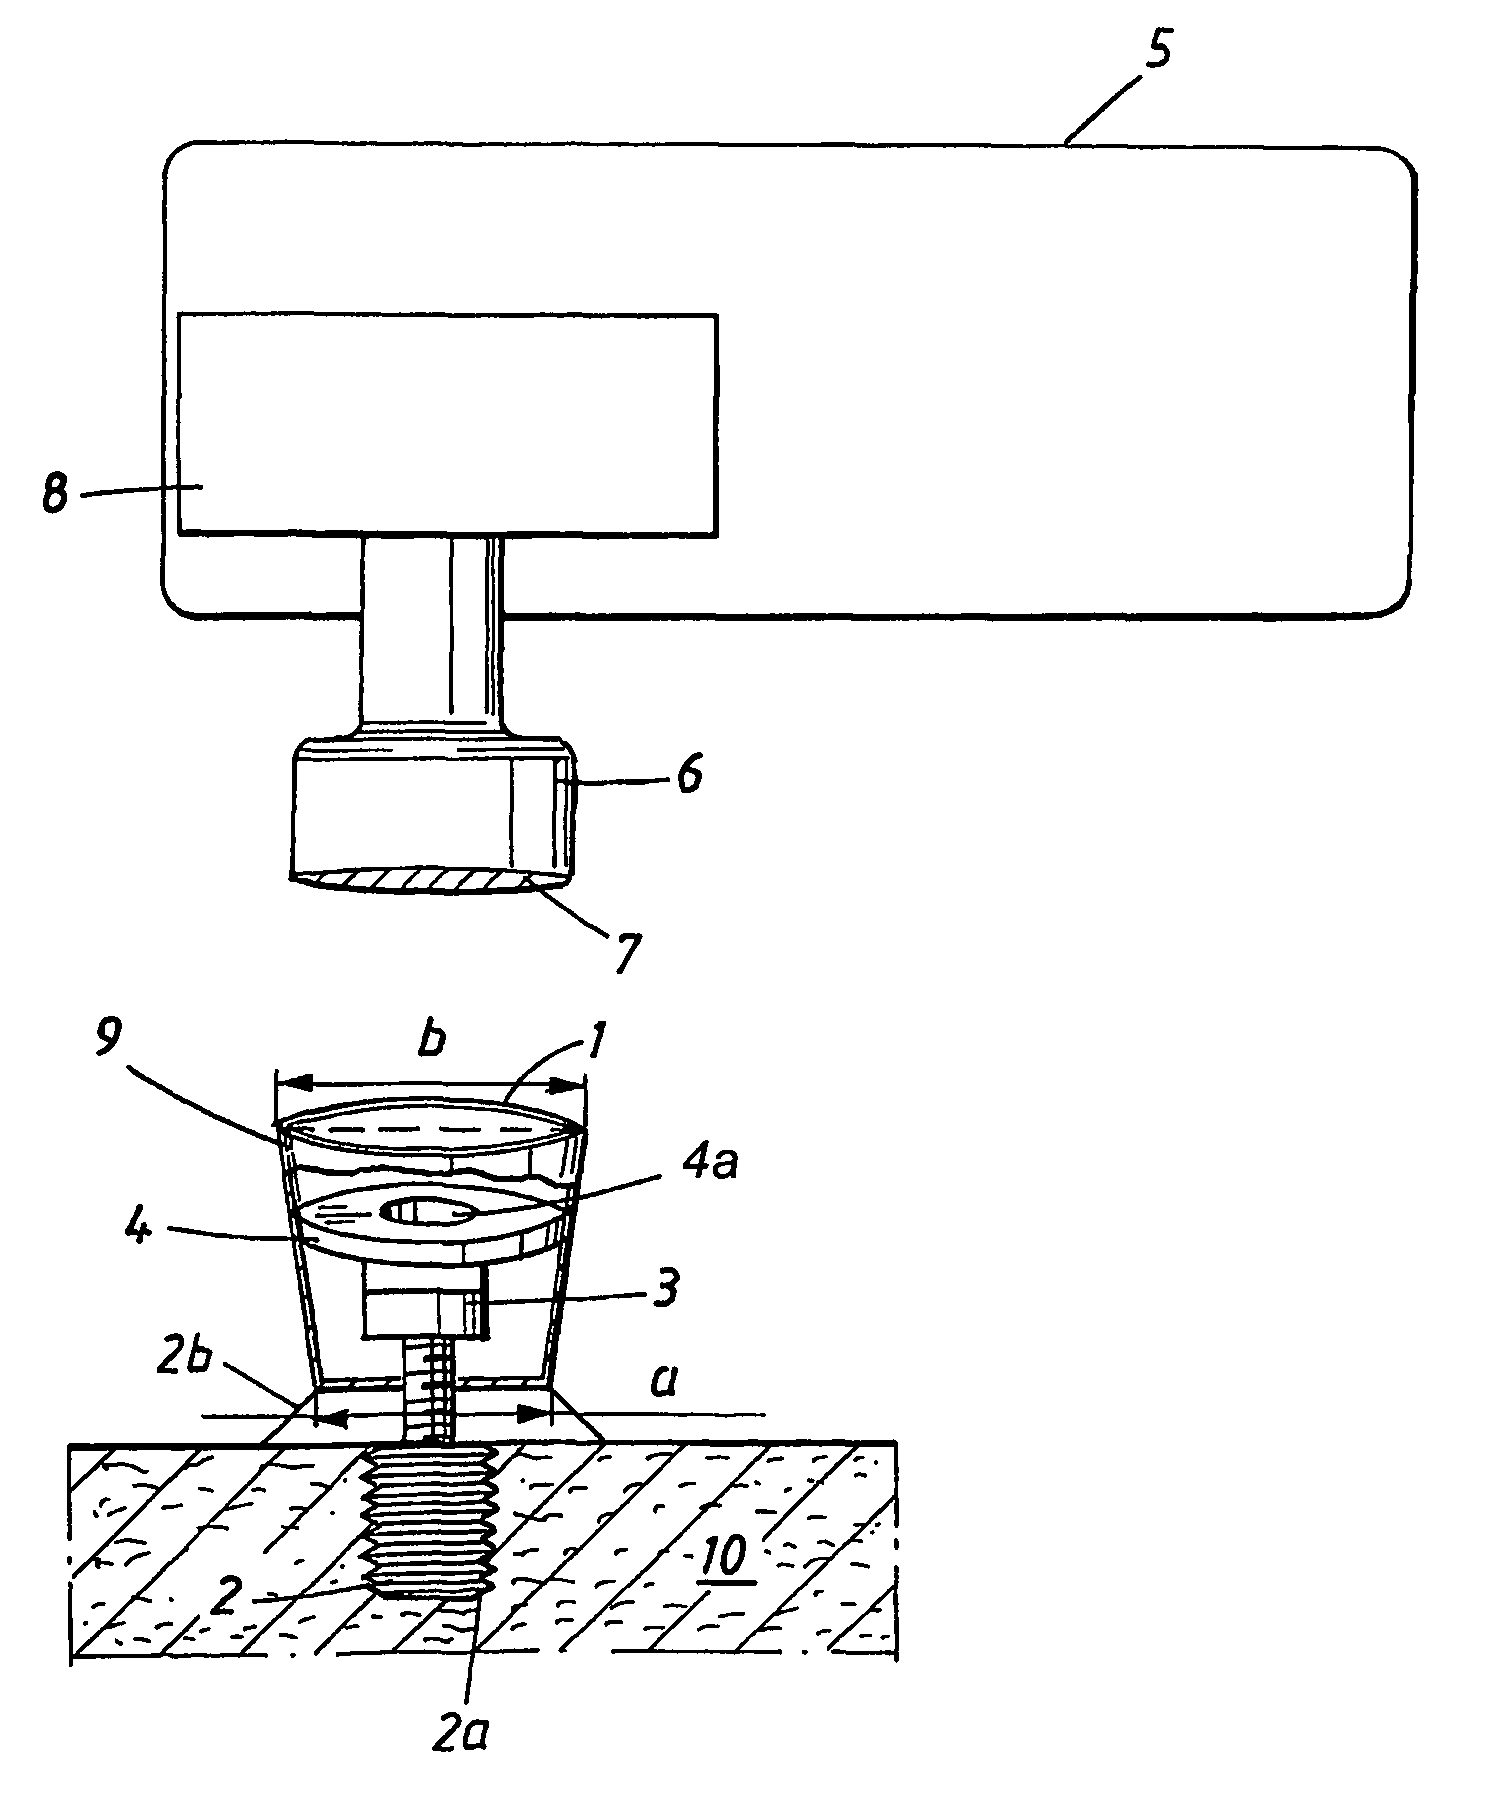 Coupling device for a two-part bone-anchored hearing aid apparatus